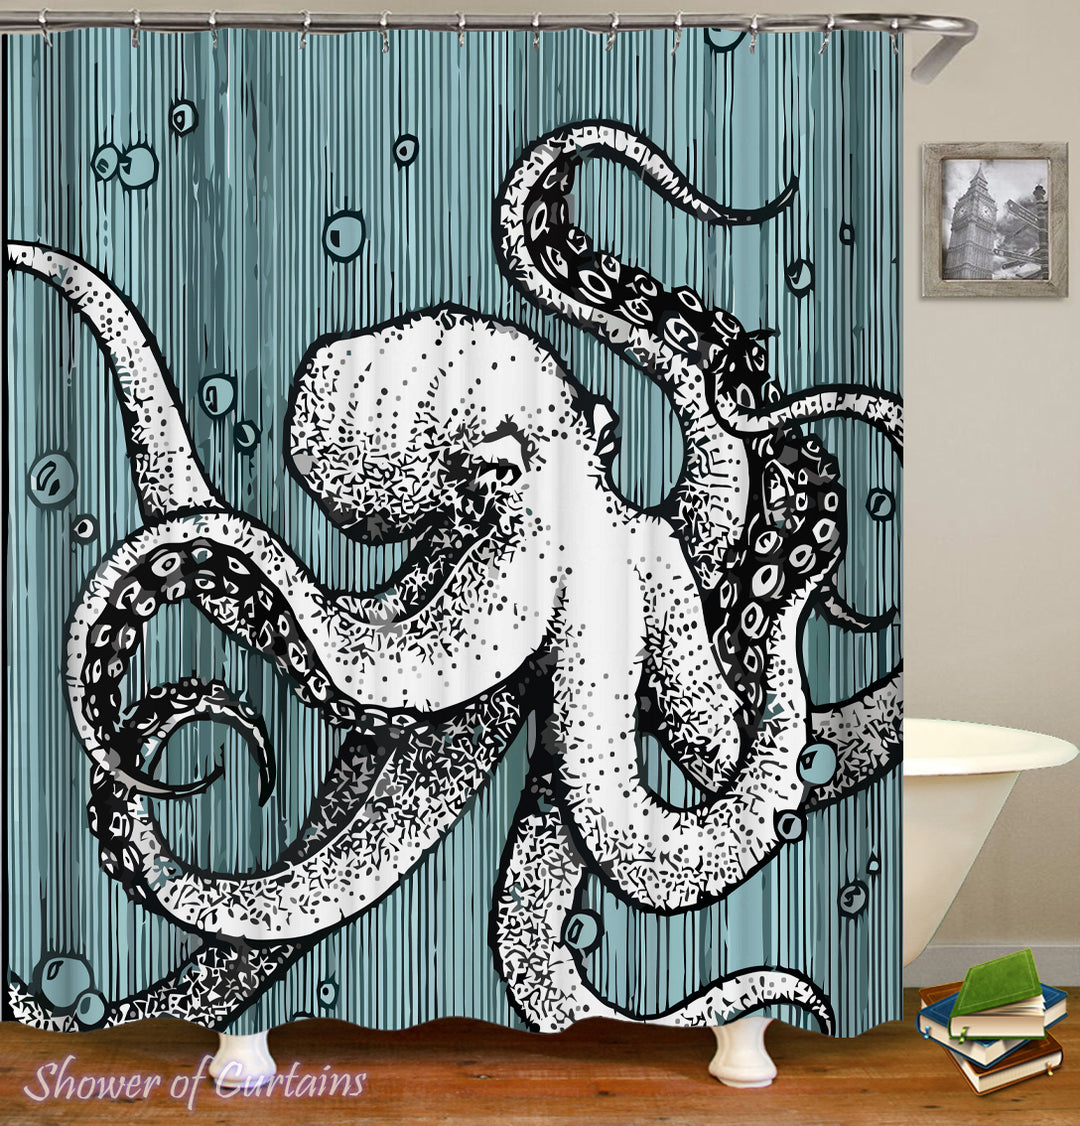 Black And White Octopus Shower Curtain